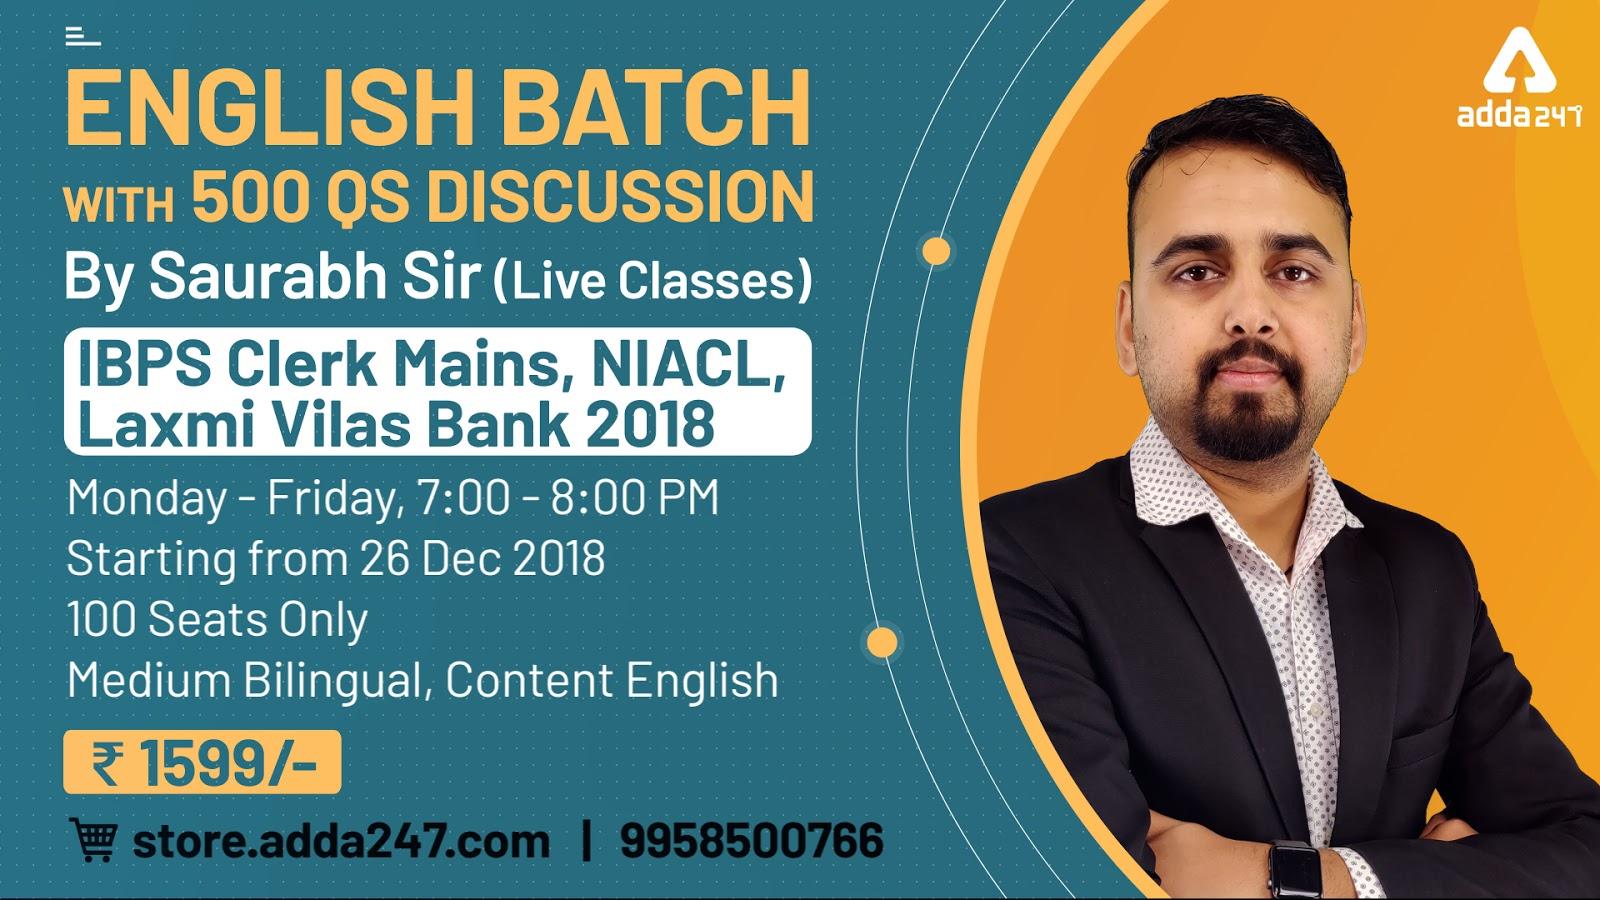 IBPS Clerk Mains, NIACL, Laxmi Vilas Bank 2018 English Batch With 500Qs Discussion By Saurabh Sir (Live Classes) |_2.1